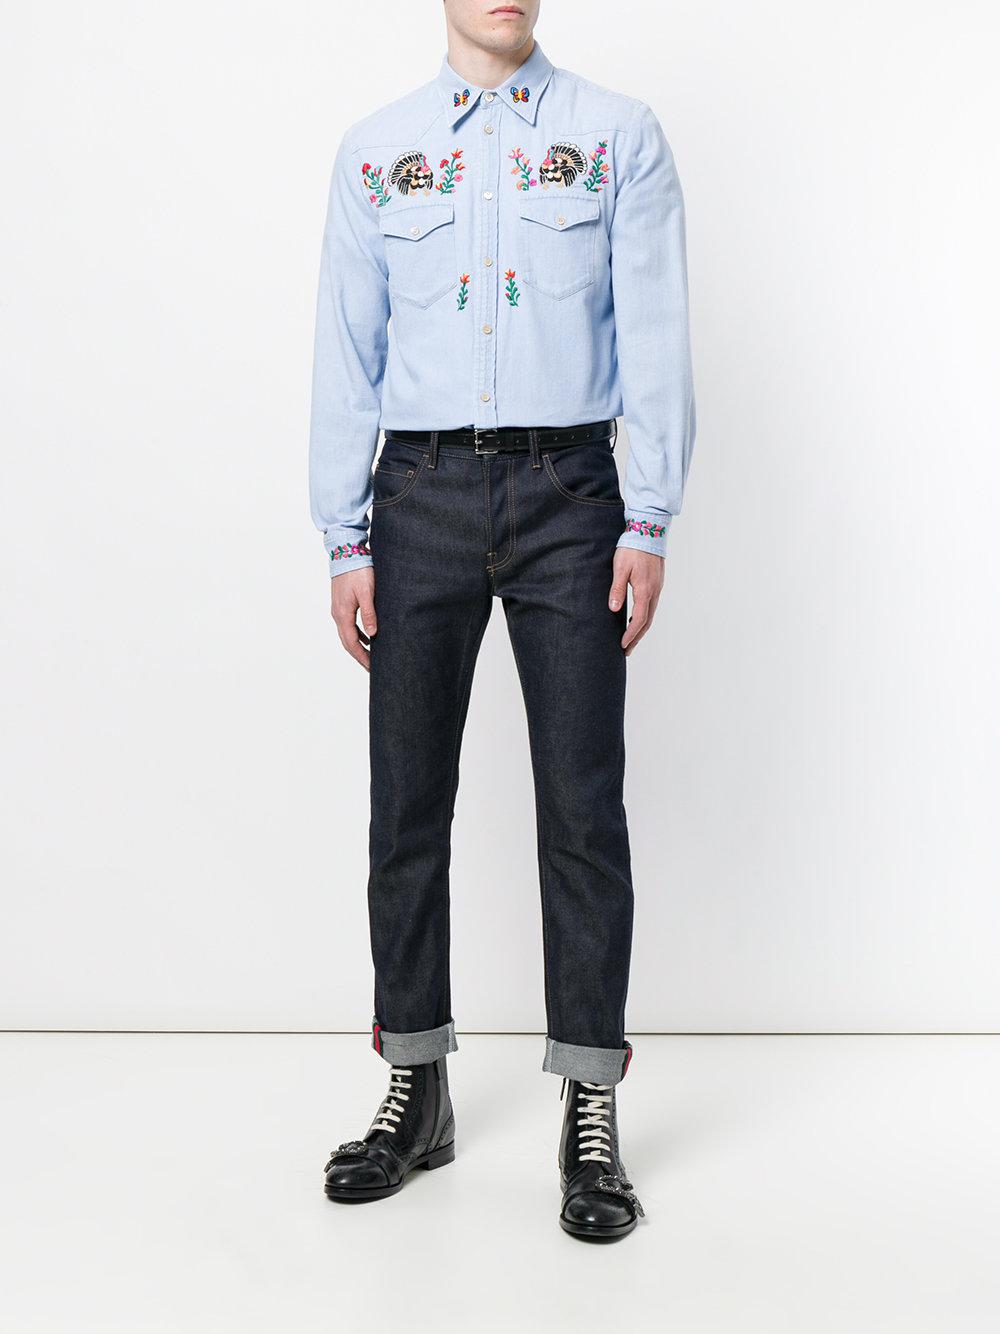 Gucci Embroidered Denim Shirt in Blue for Men - Lyst